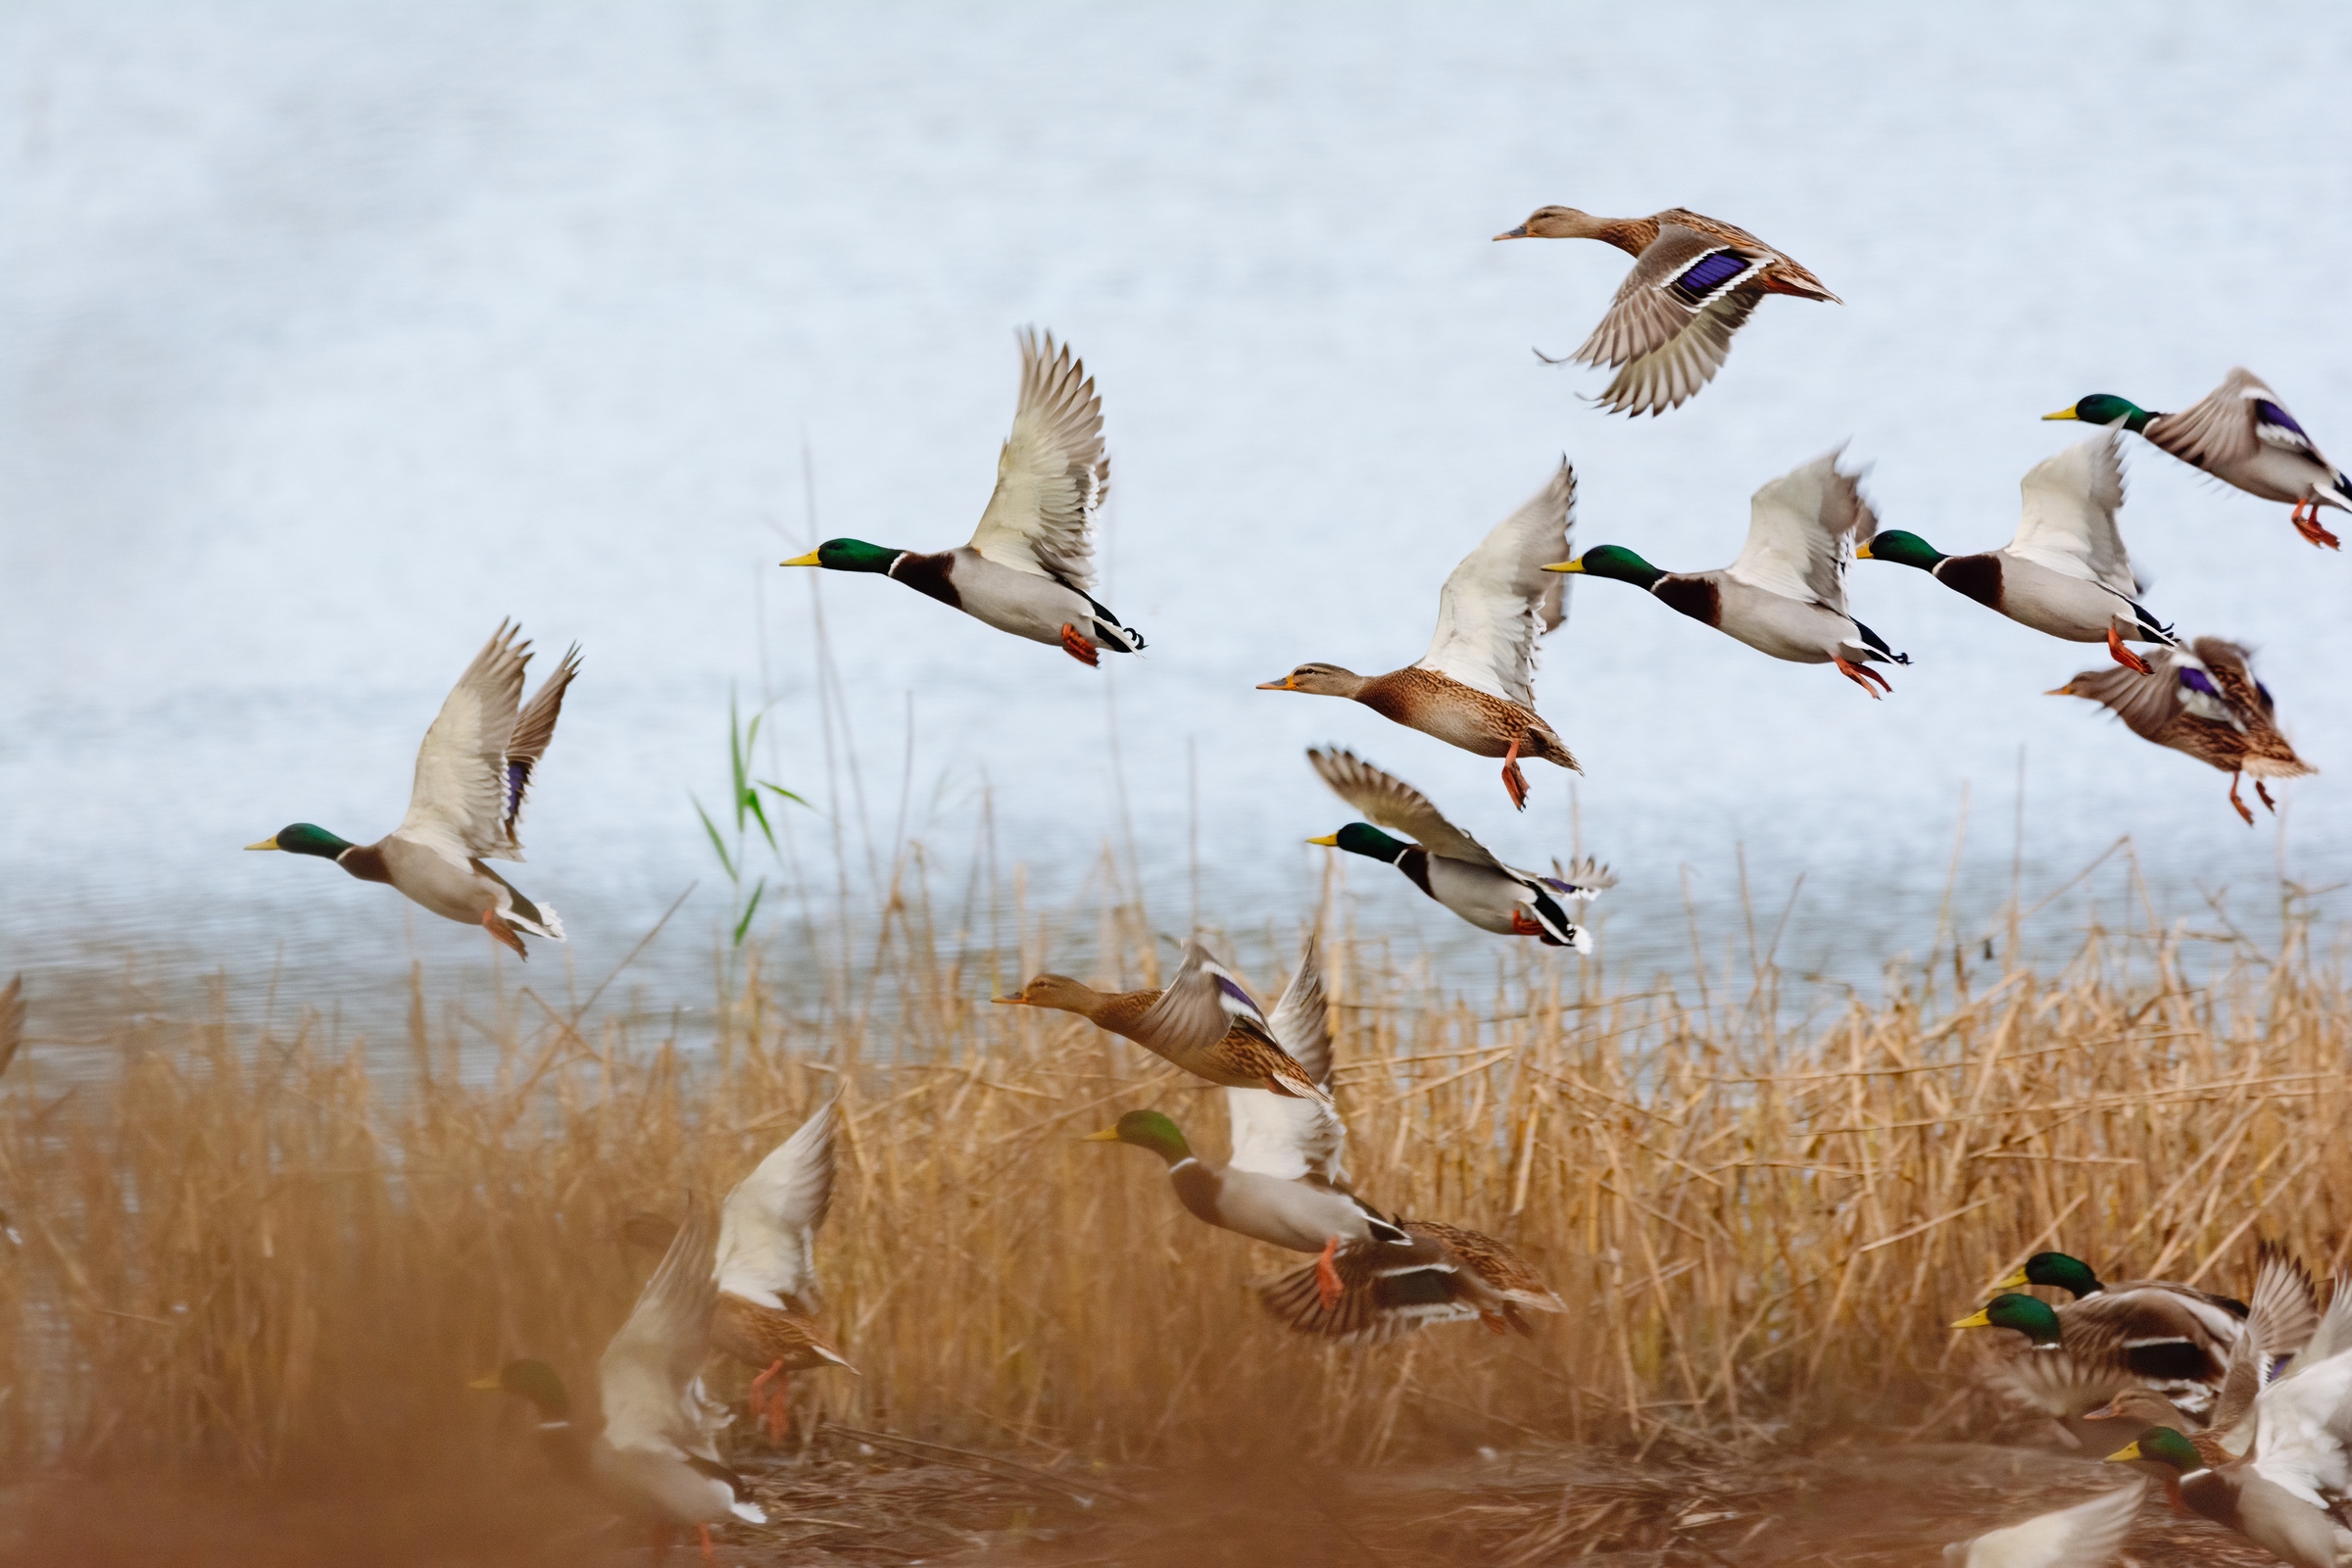 Mallard ducks fly over the lake together, just passing over the tall grass.